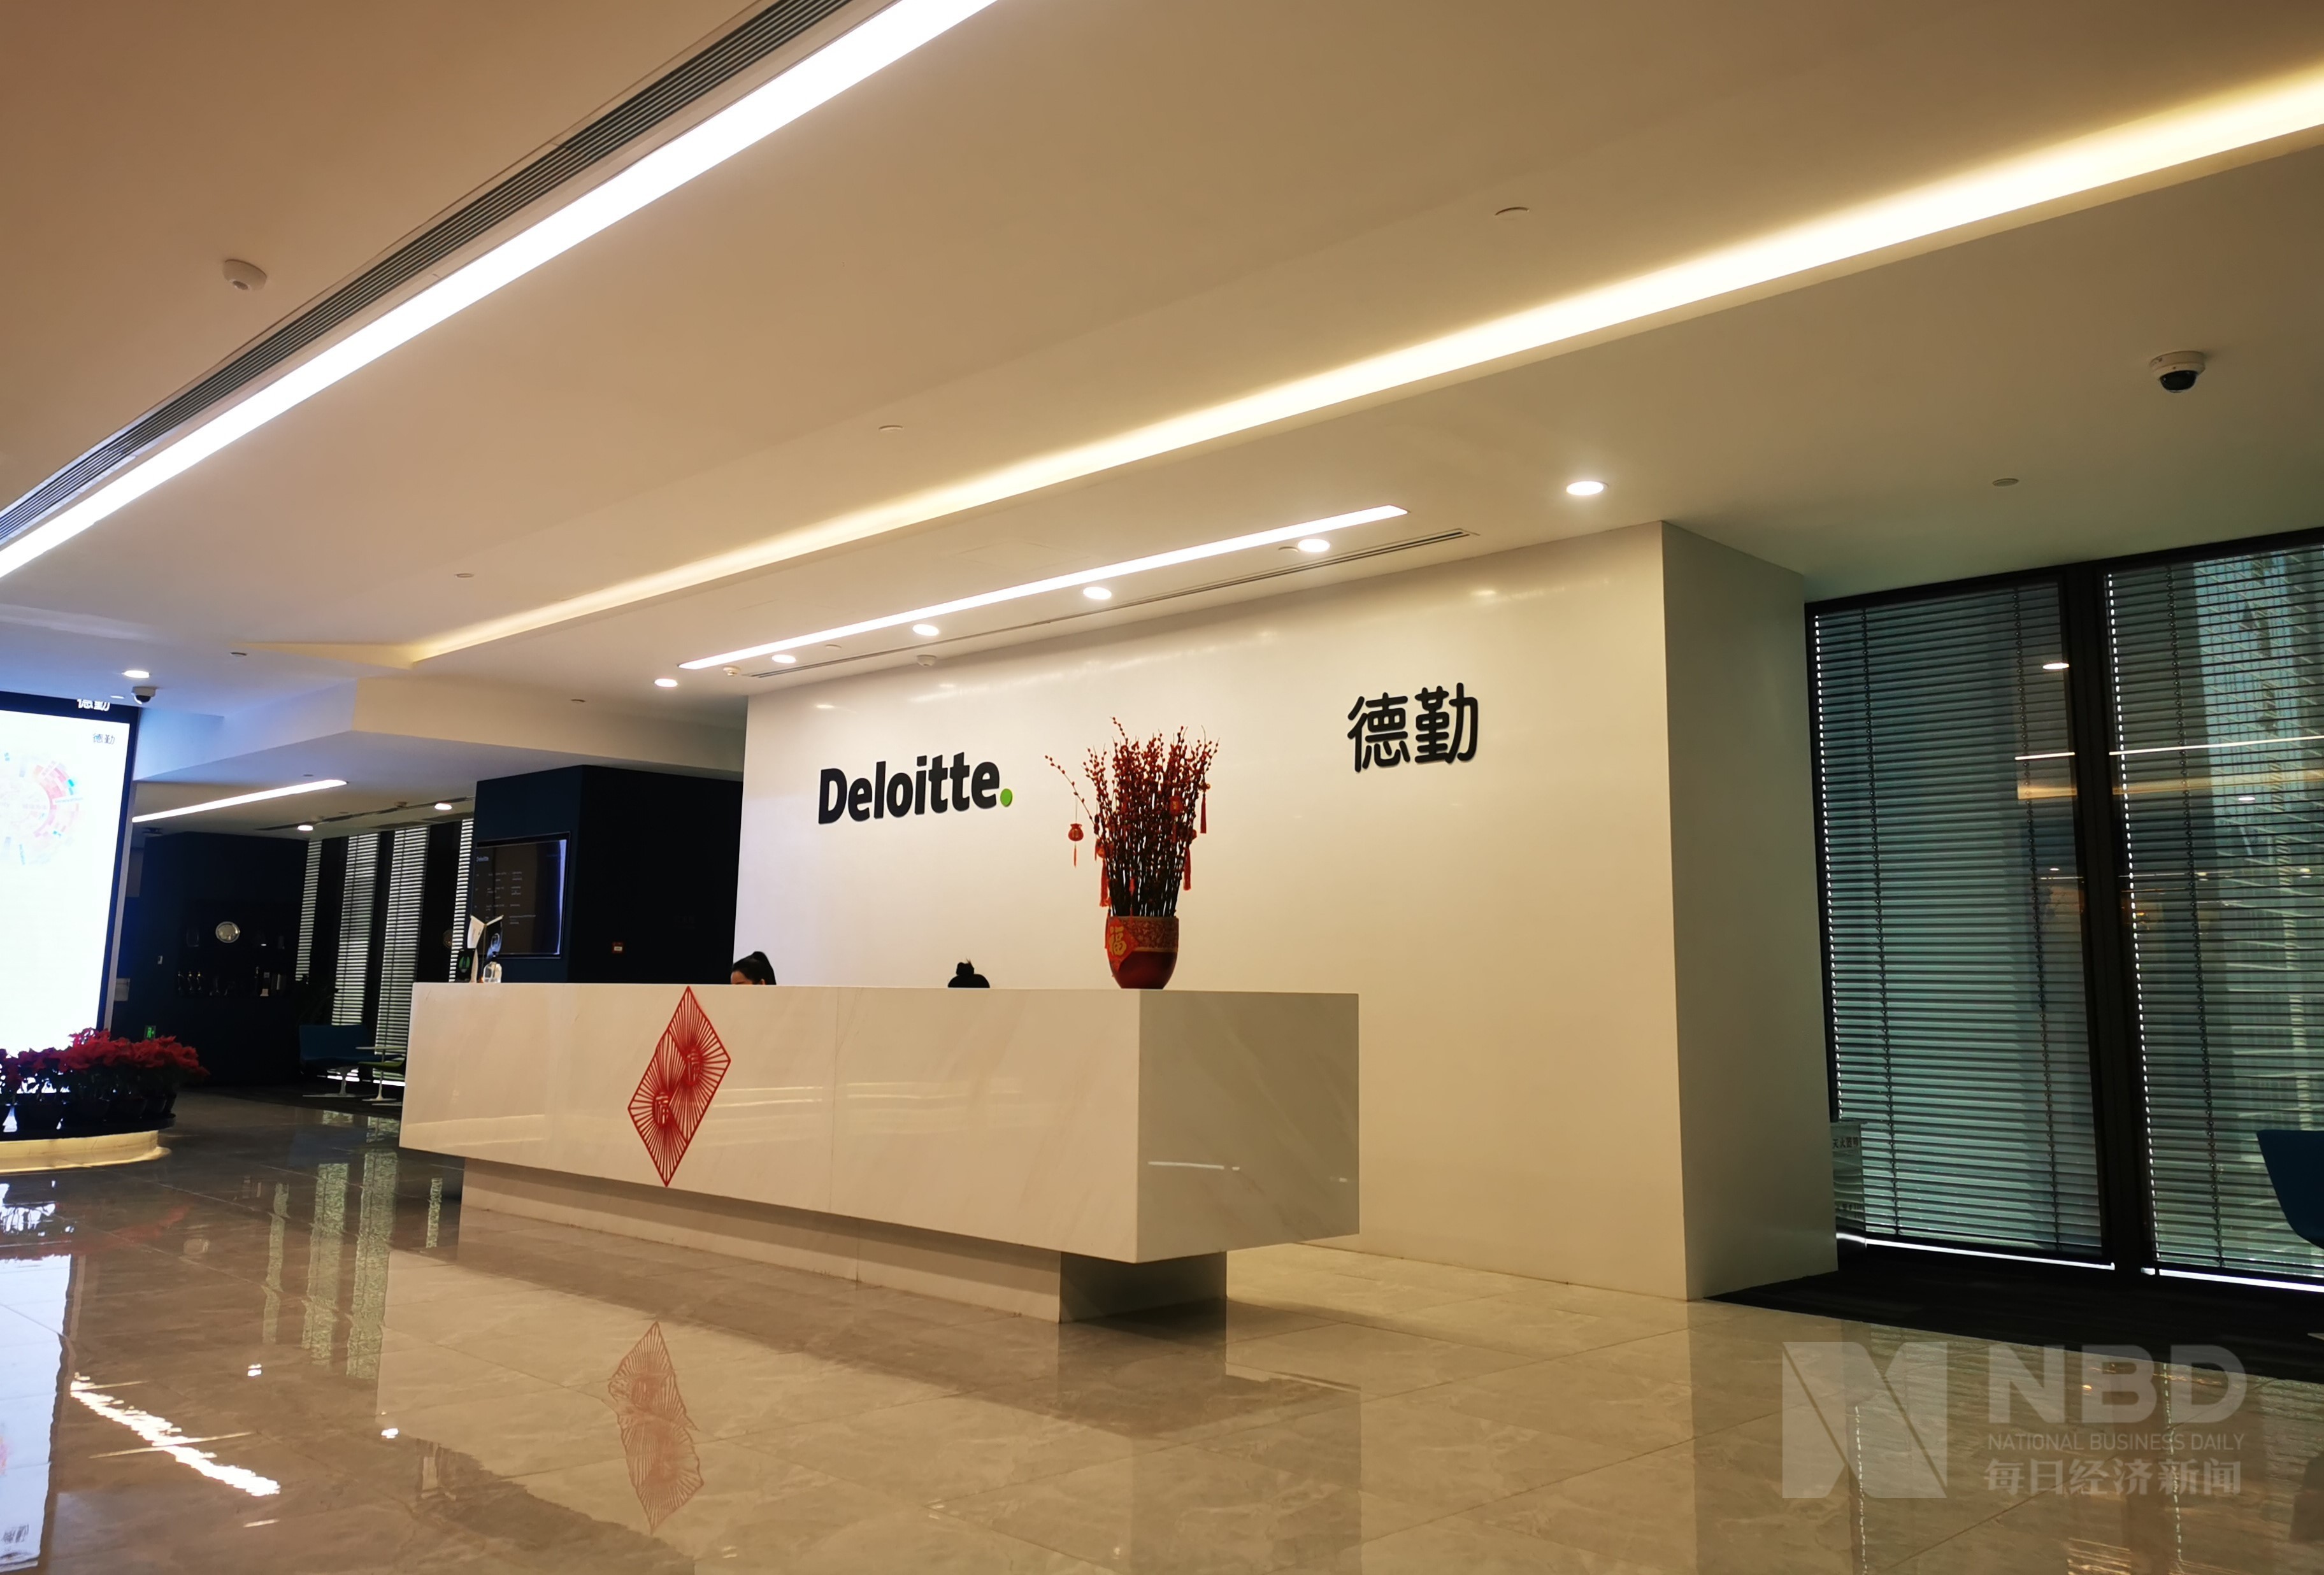 After spot ｜ in-house PPT informs against incident, substation of De Qin Beijing does fair De Qin normally: The meeting inside today sends statement